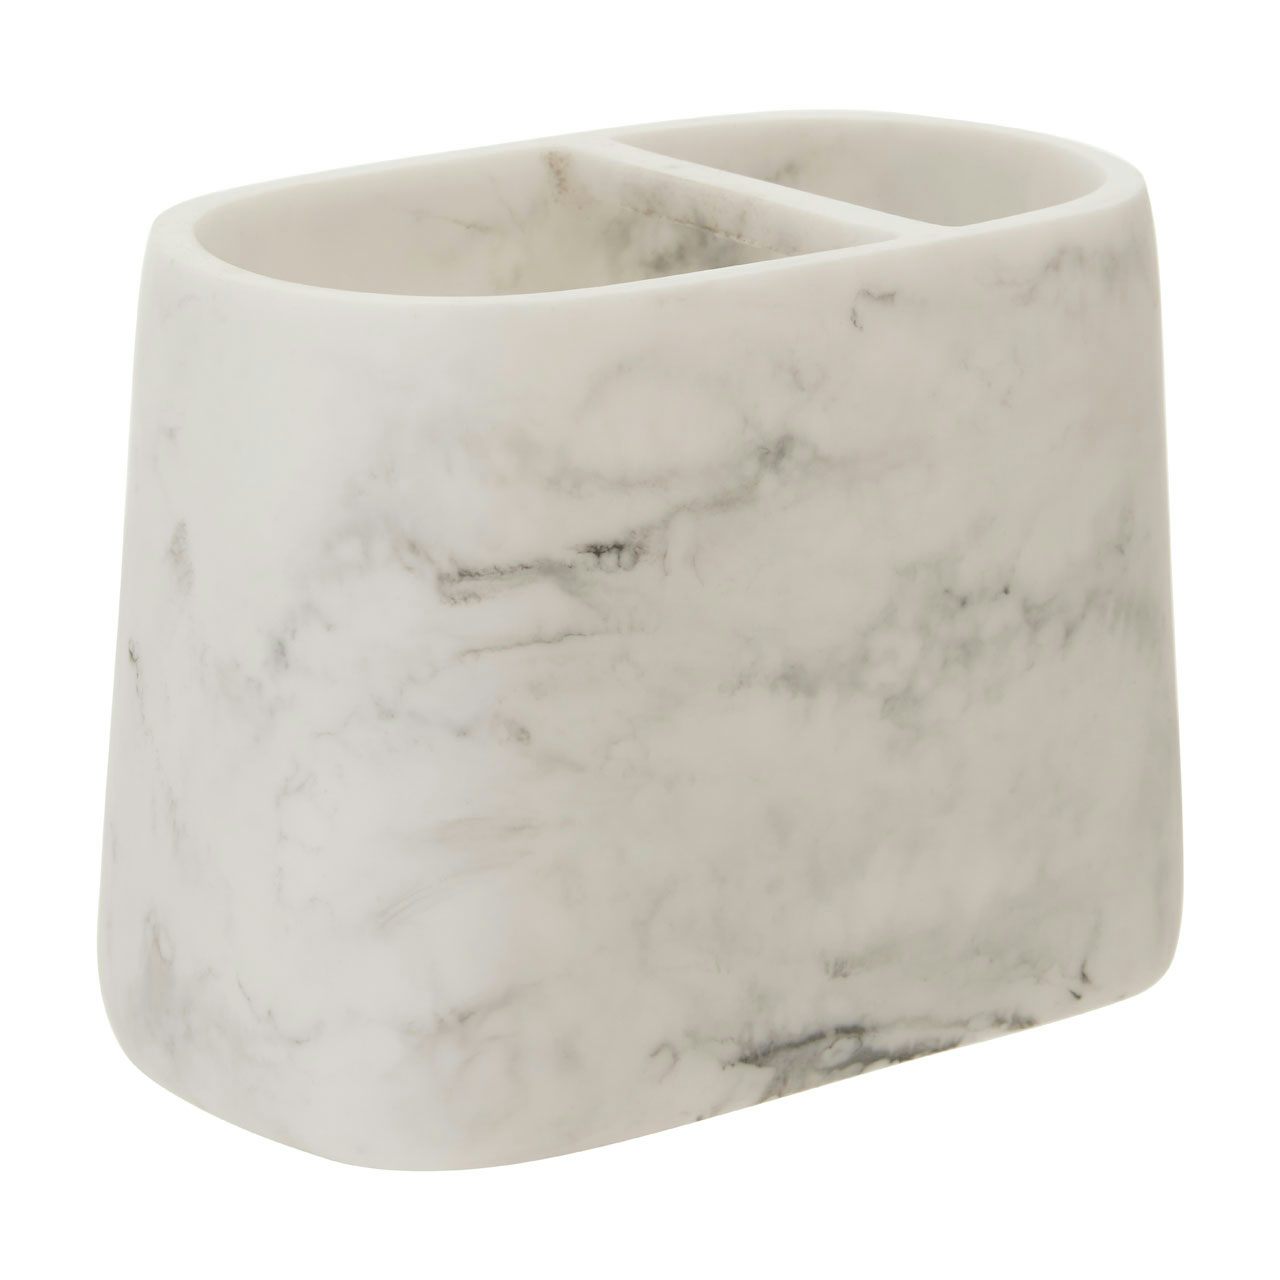 Accents Riviera smooth white marble toothbrush holder